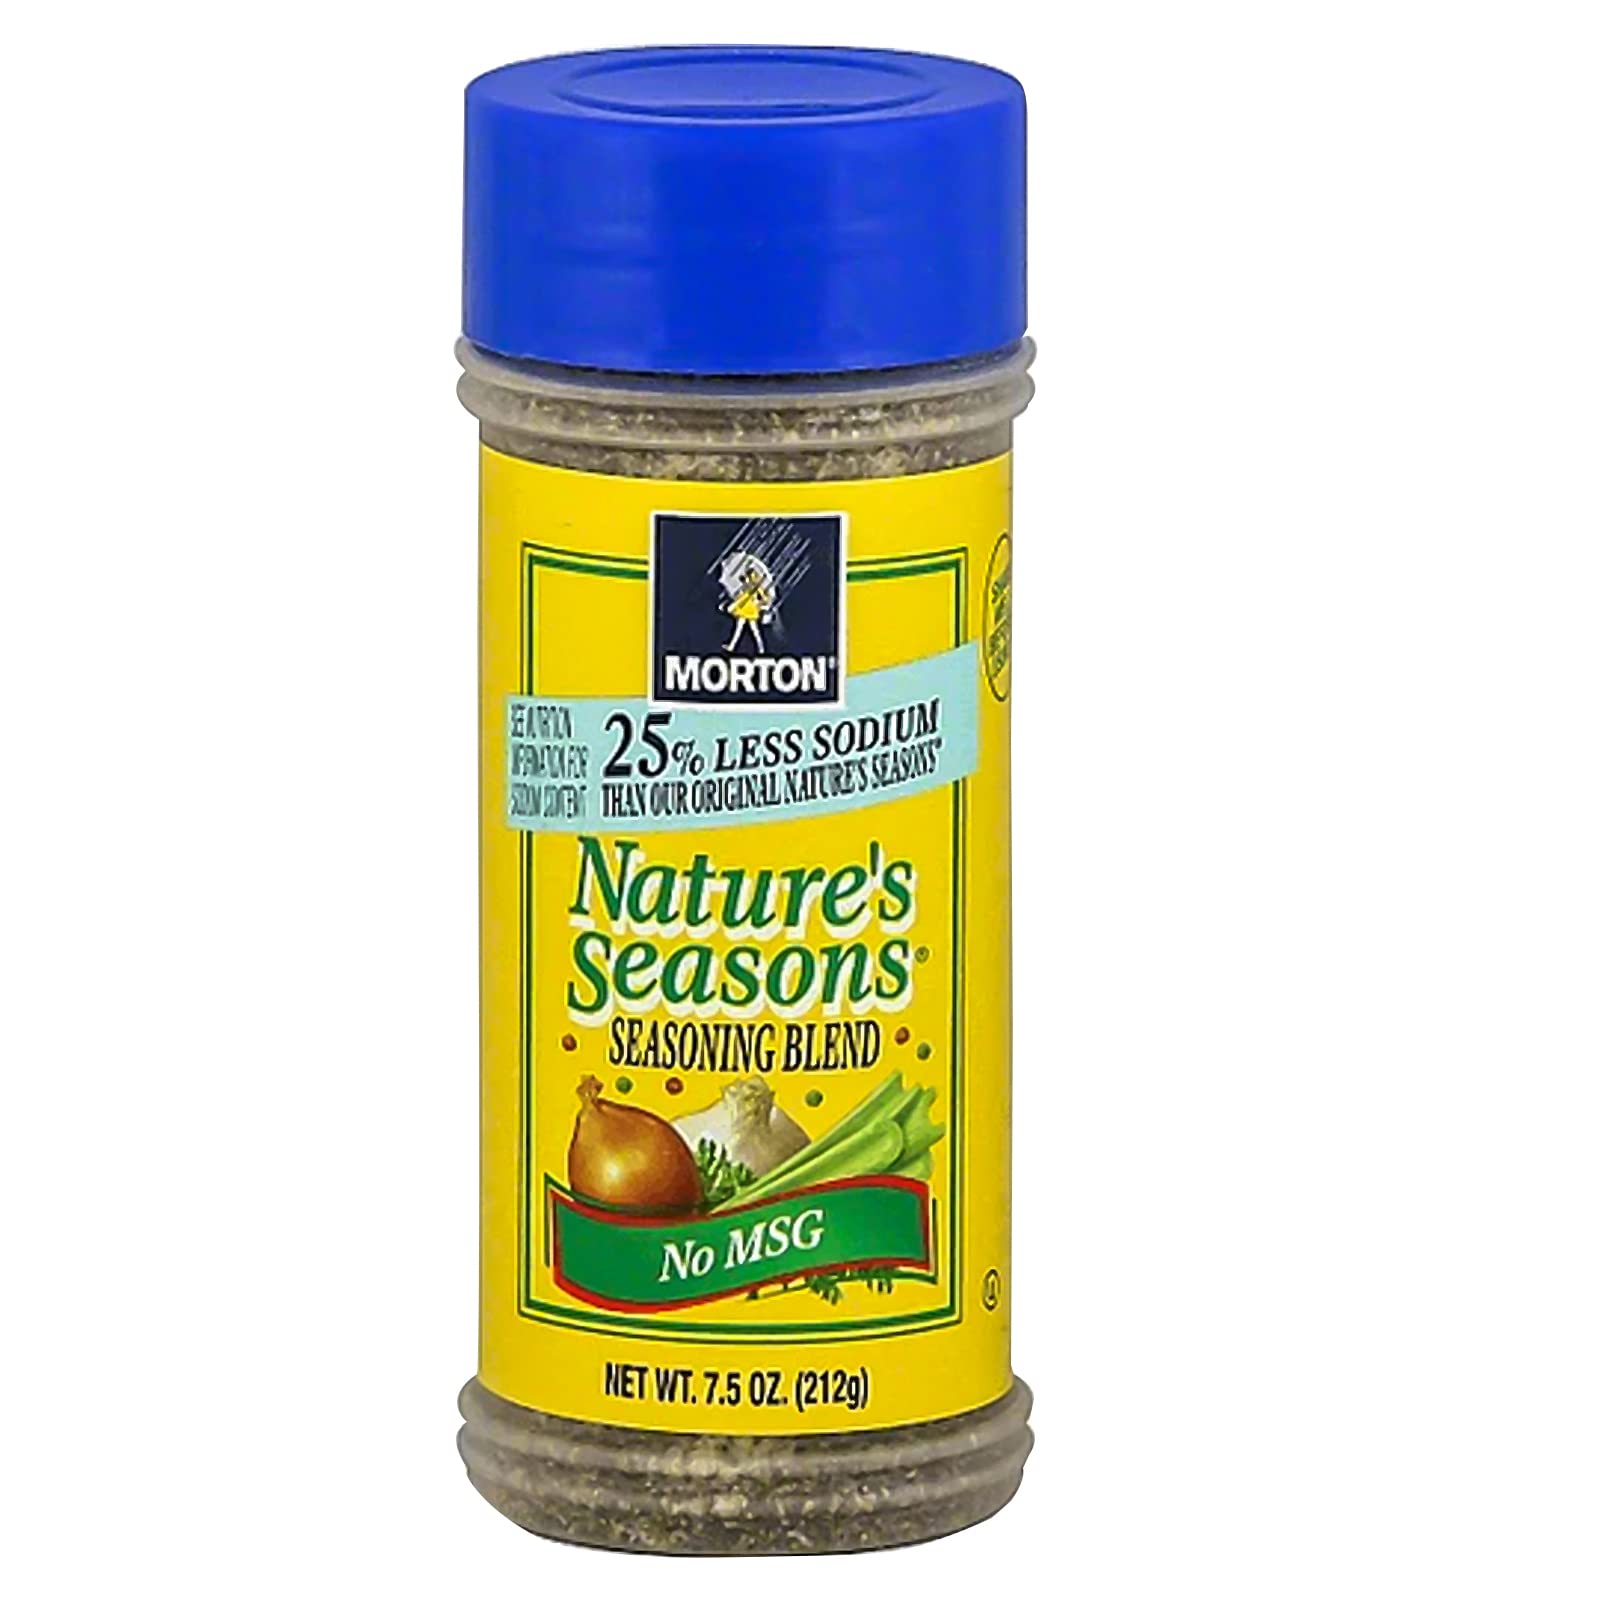 Mortons Natures Seasoning Blend - All Purpose Seasoning Blend - Morton Sausage Seasoning - Perfect Combination of Salt, Pepper, Onion, Garlic - Comes With Crave Island Durable Tin- 7.5oz